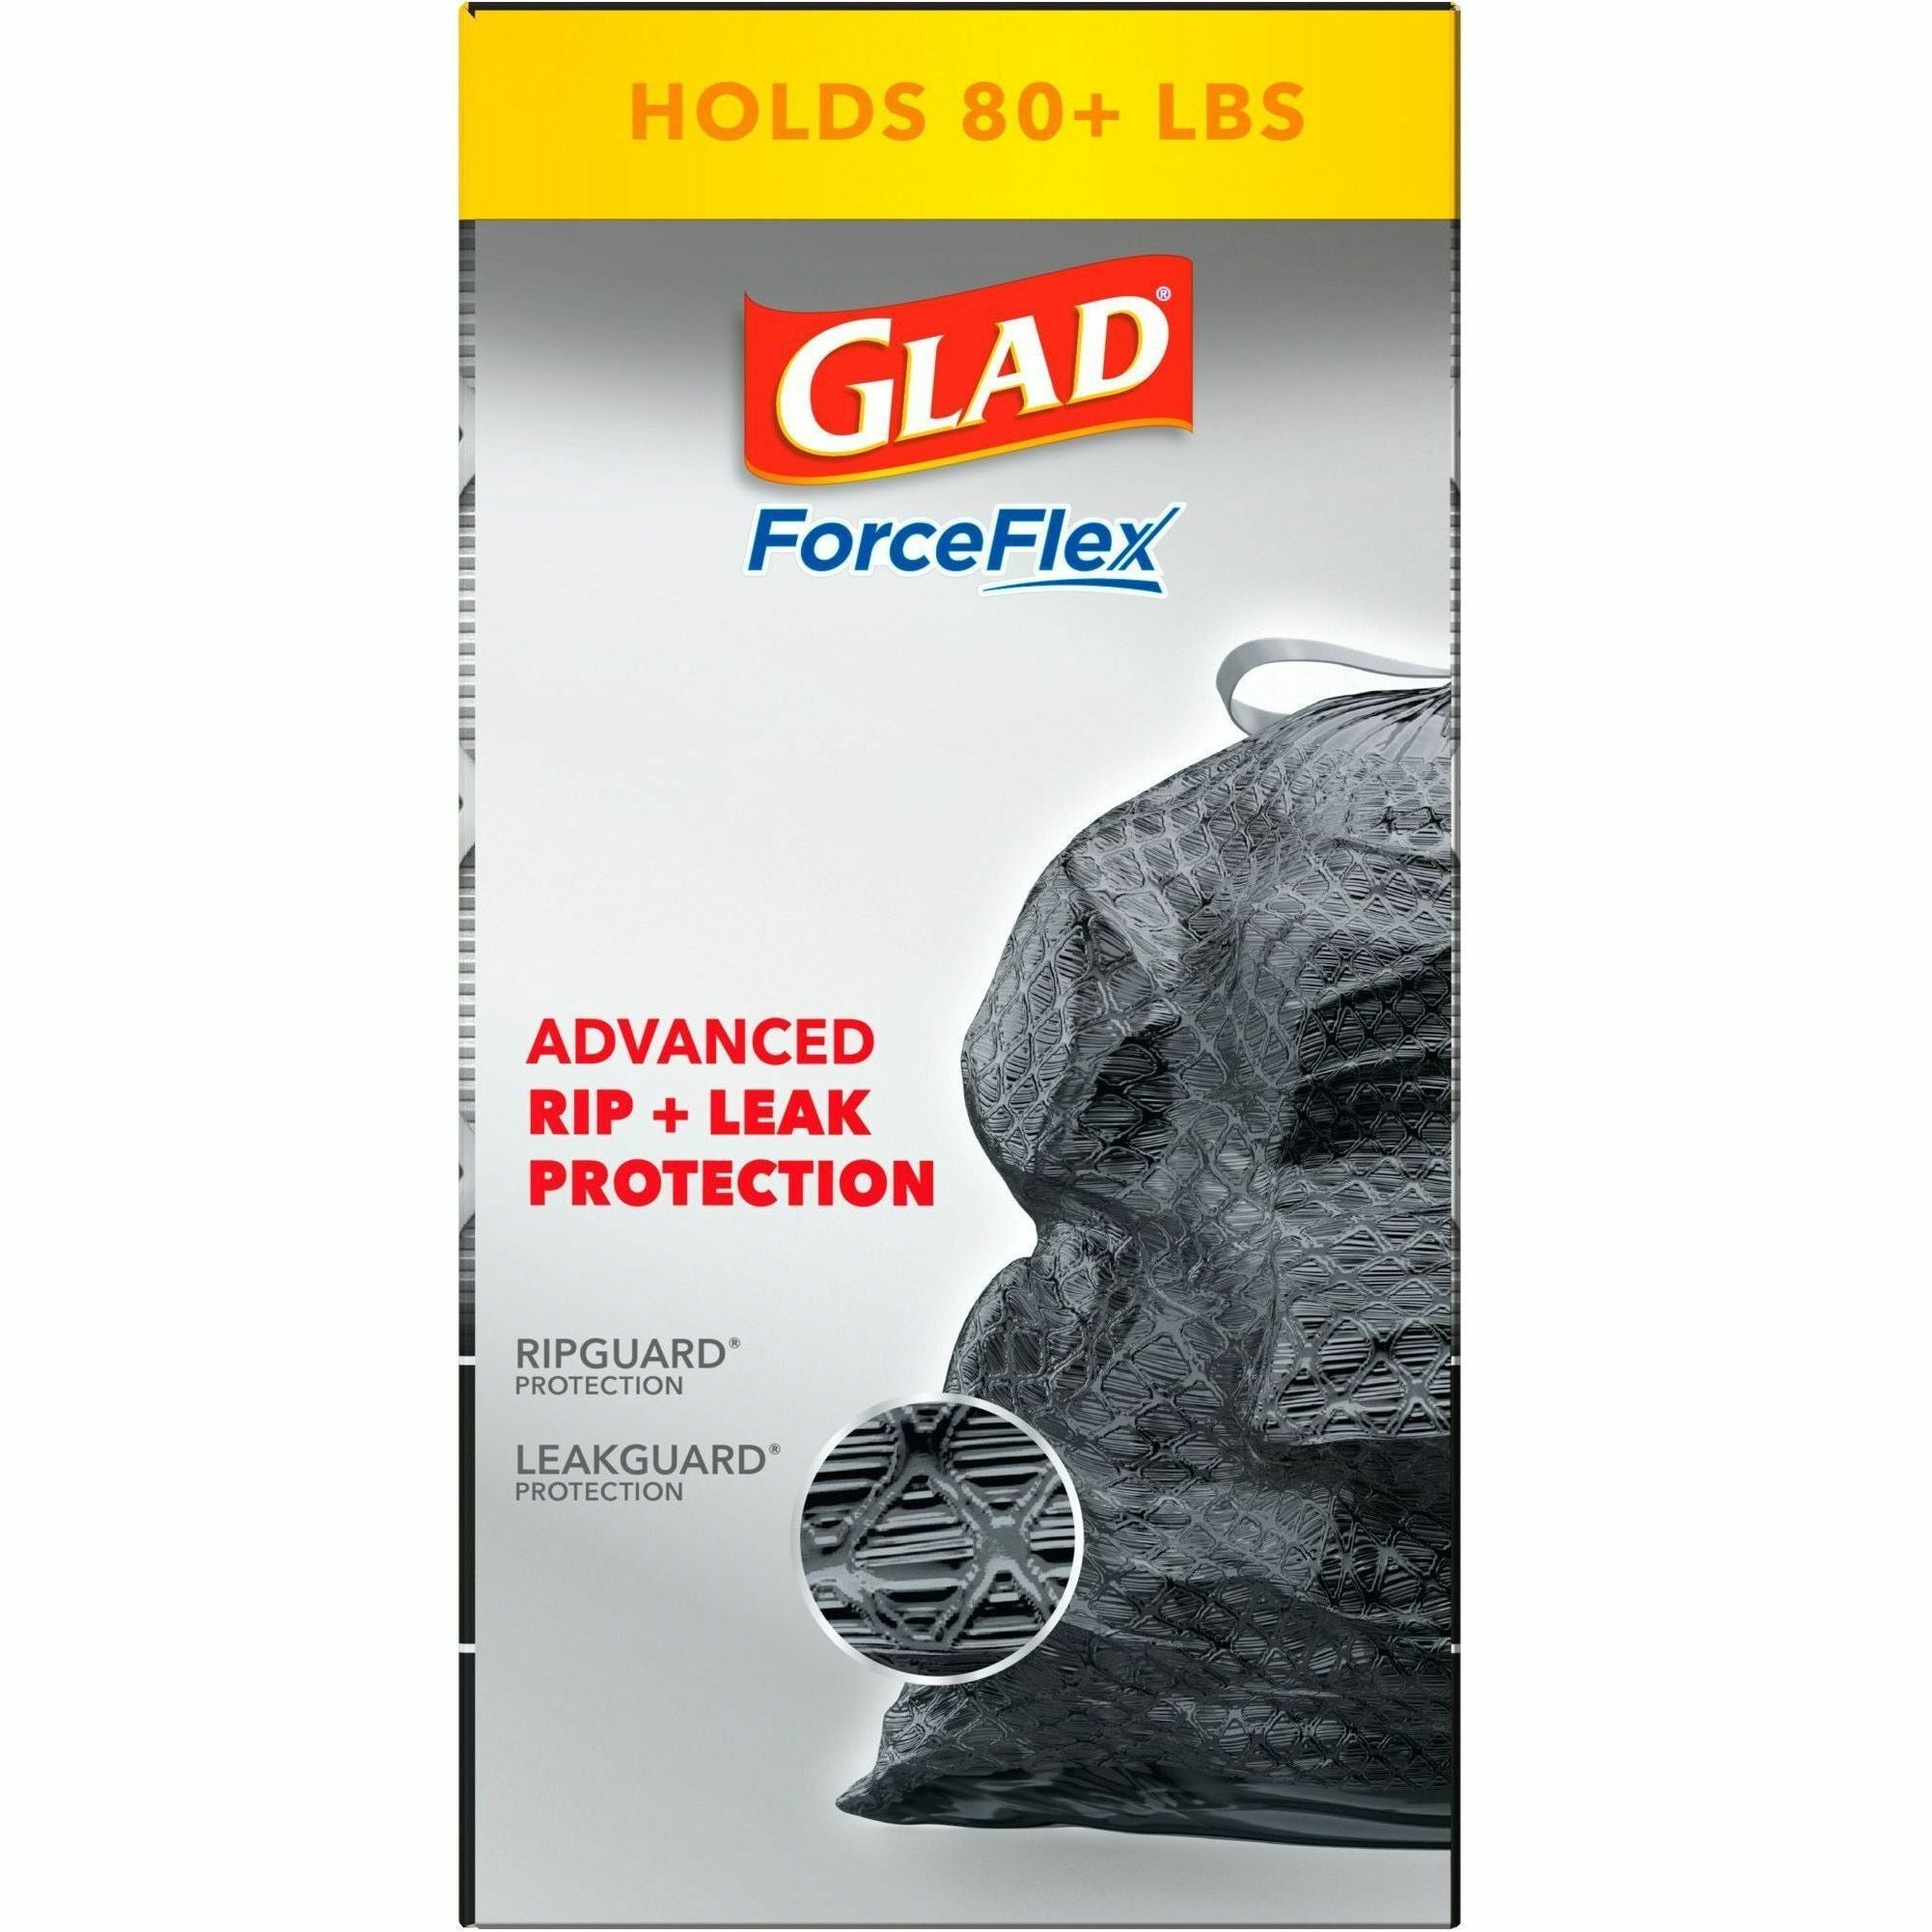 Glad ForceFlexPlus Drawstring Large Trash Bags - Large Size - 30 gal Capacity - 30" Width x 32.01" Length - 0.90 mil (23 Micron) Thickness - Drawstring Closure - Black - 1Box - 50 Per Box - Garbage, Indoor, Outdoor, Home, Office, Restaurant, Commerci - 4